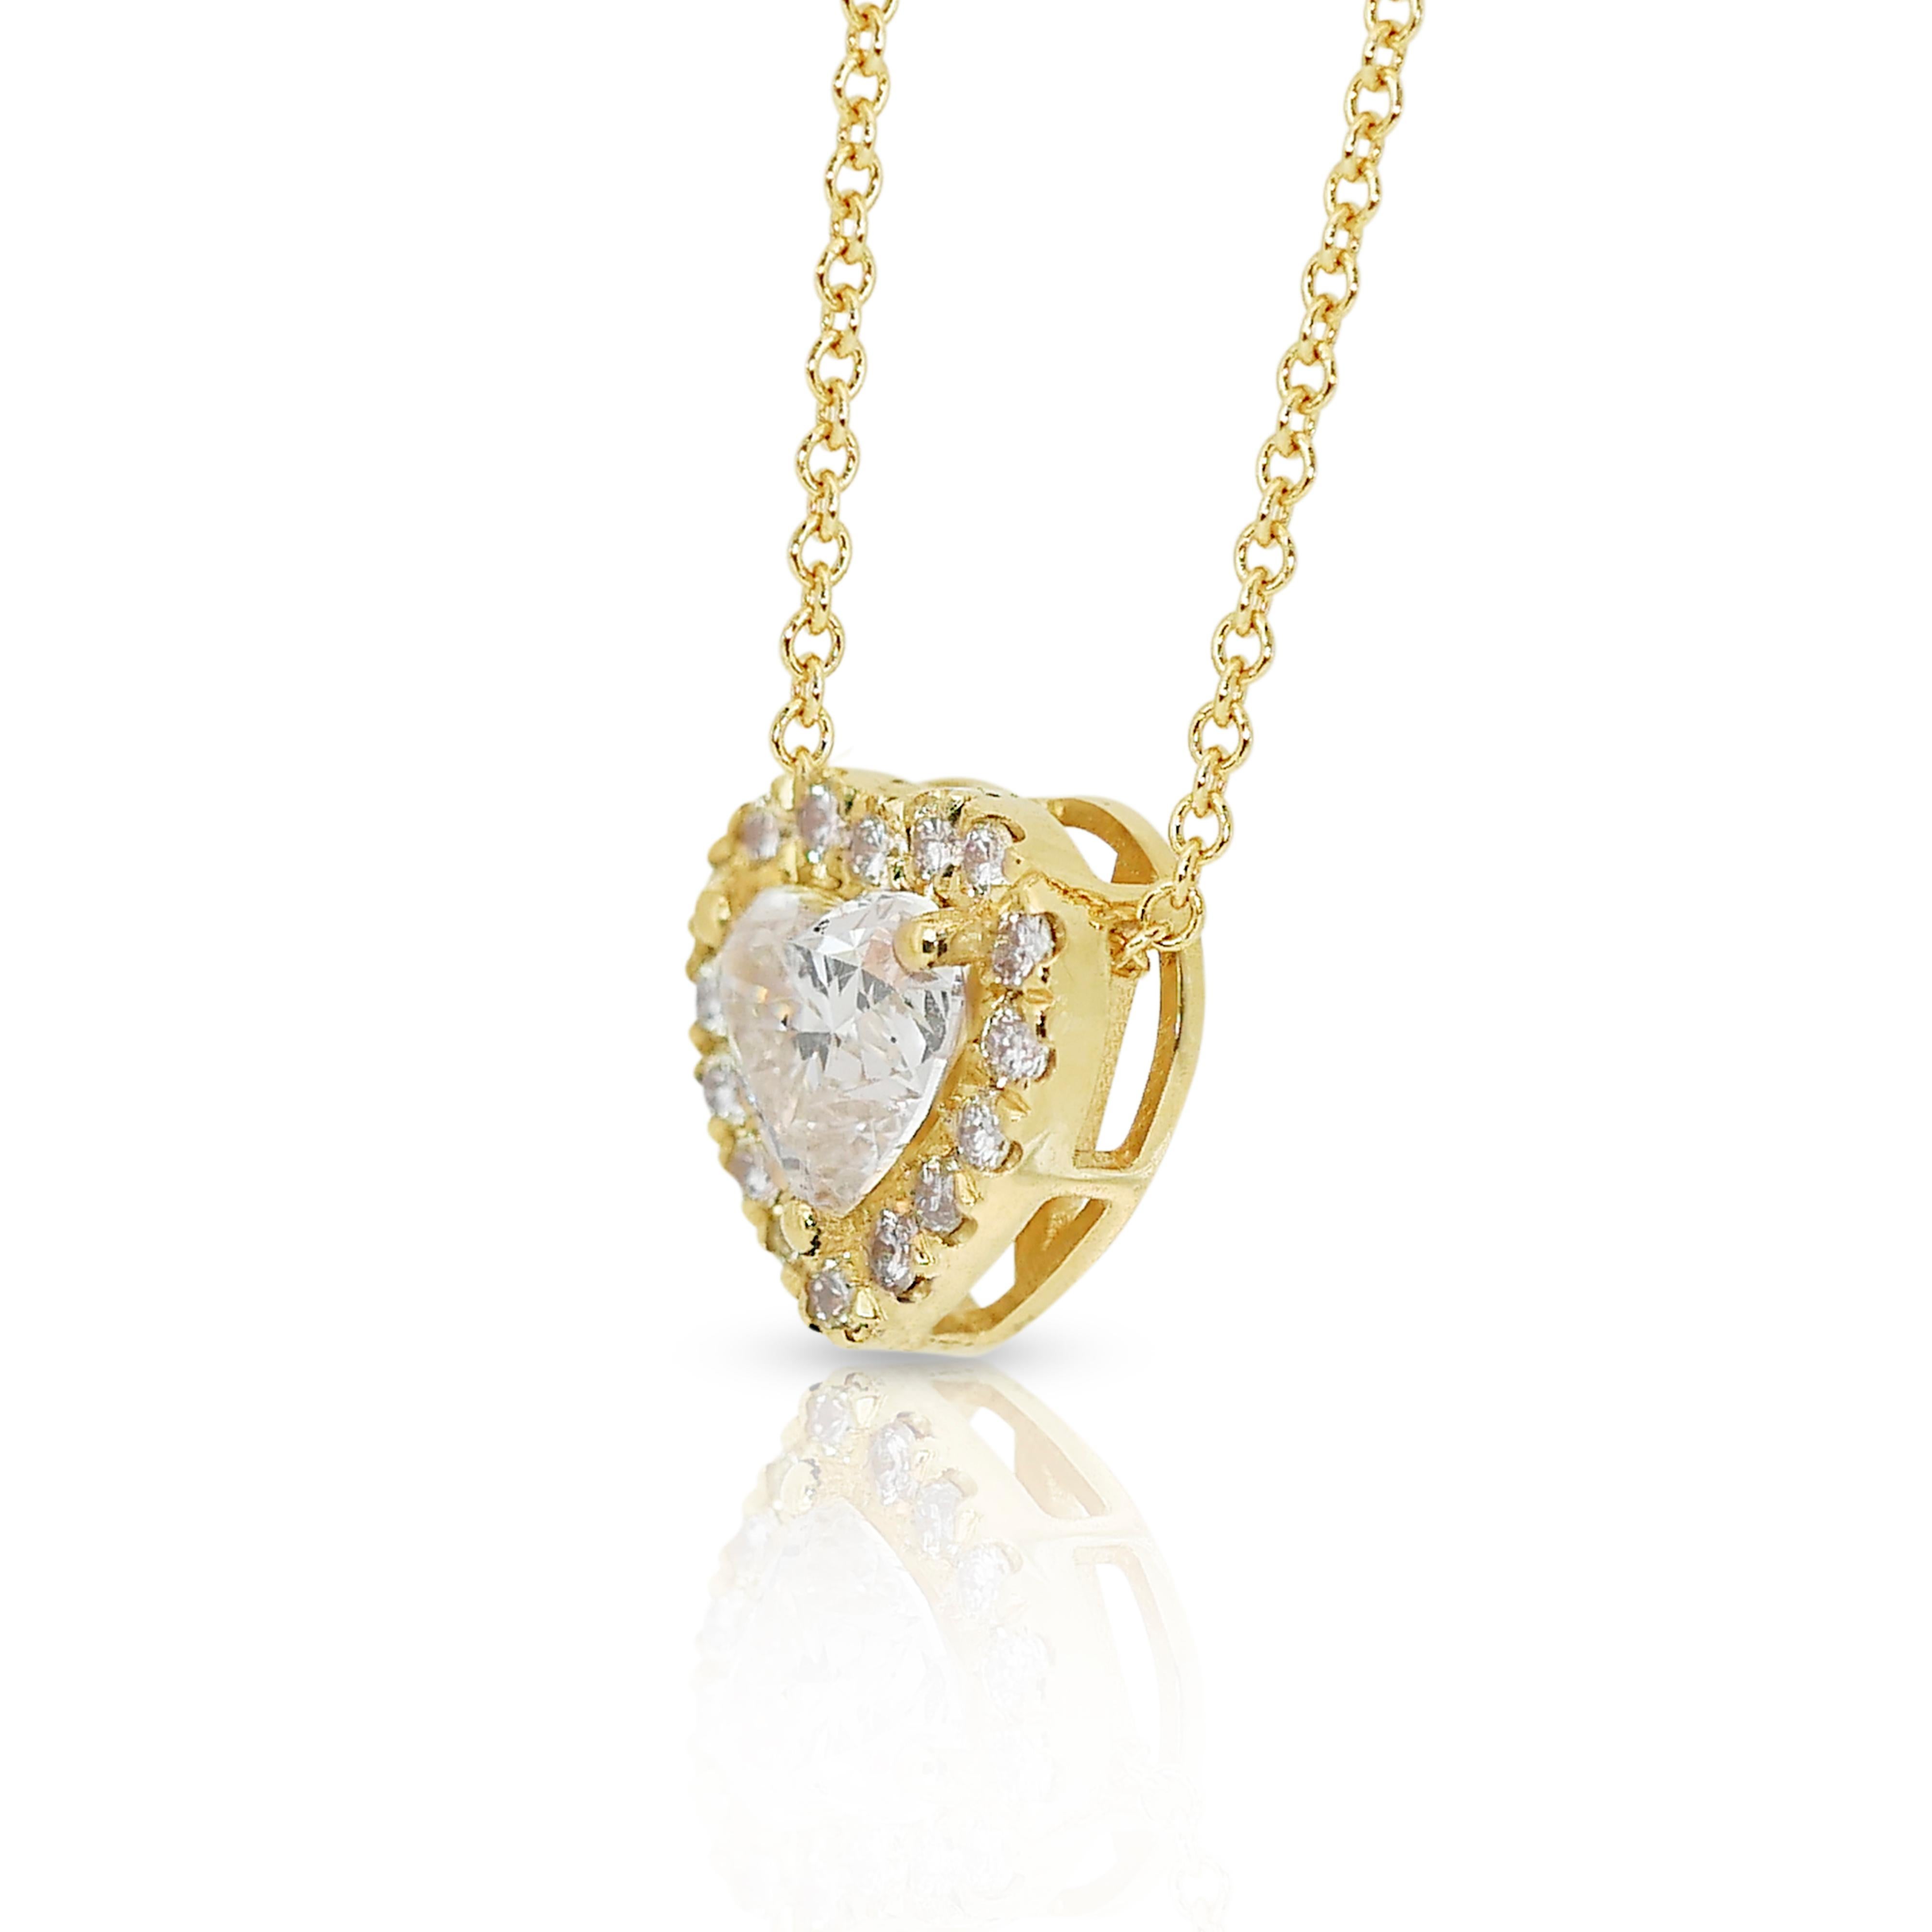 Brilliant 1.28ct Diamonds Halo Necklace in 18k Yellow Gold - IGI Certified For Sale 1